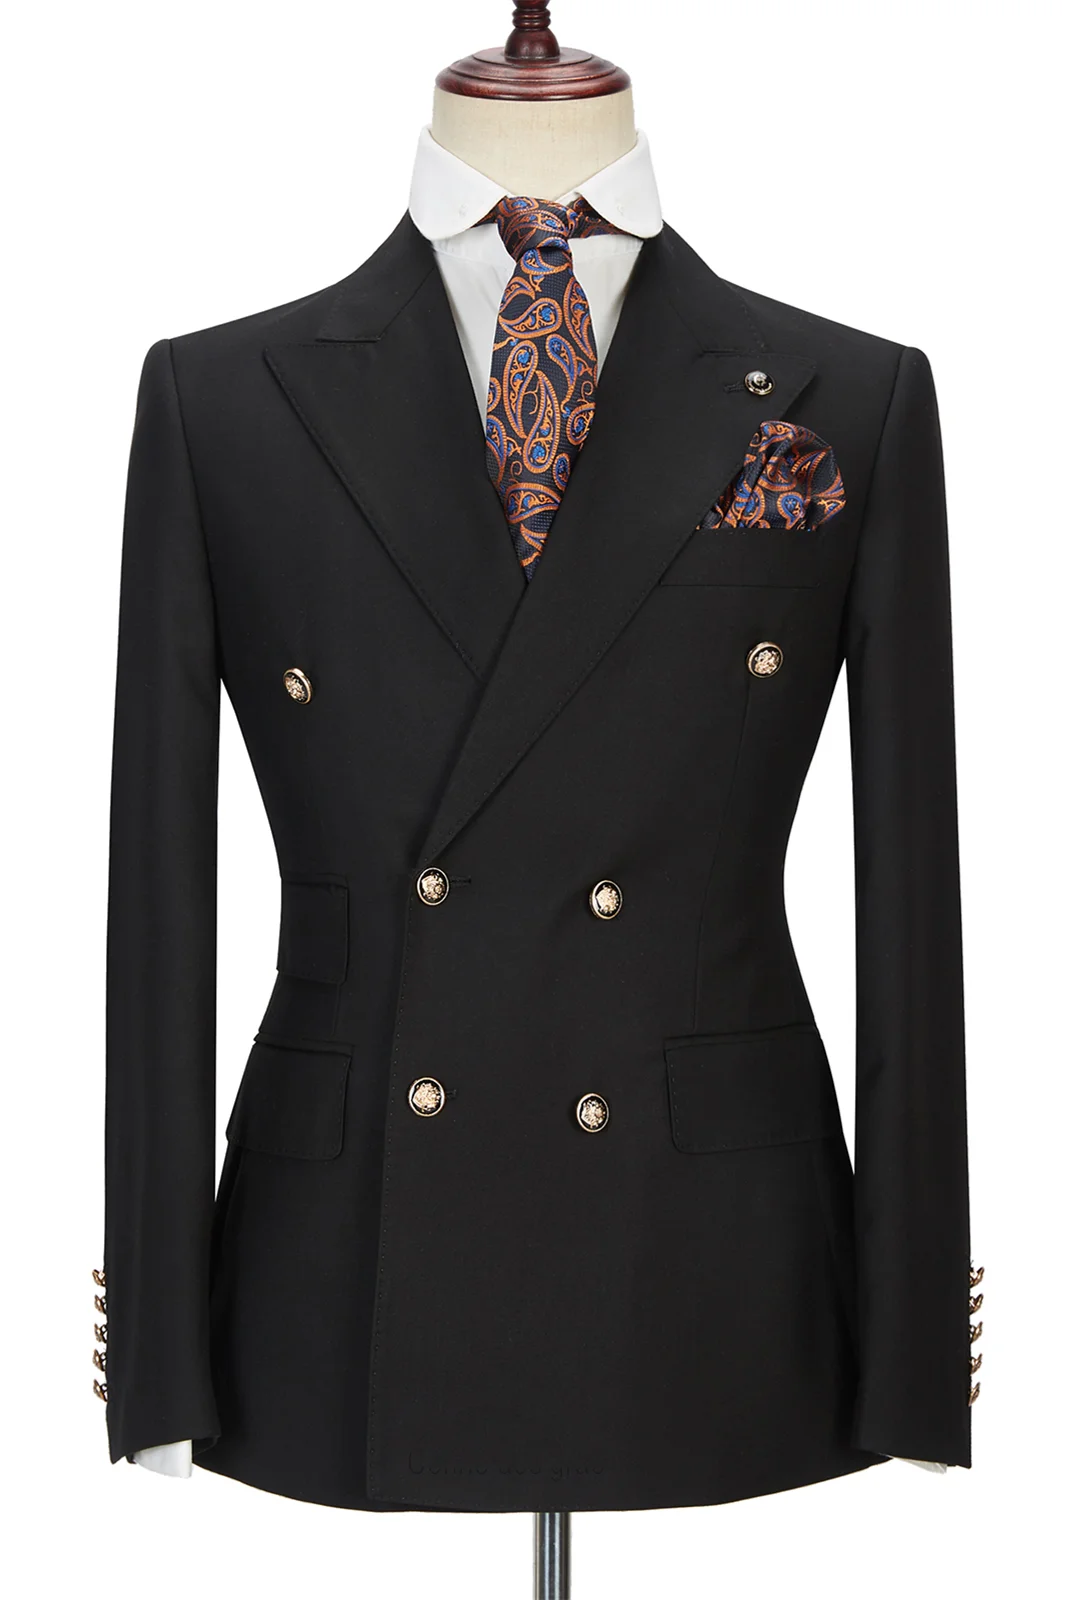 Handsome Black Wedding Suit For Groom Peak Lapel With Double Breasted Gentle